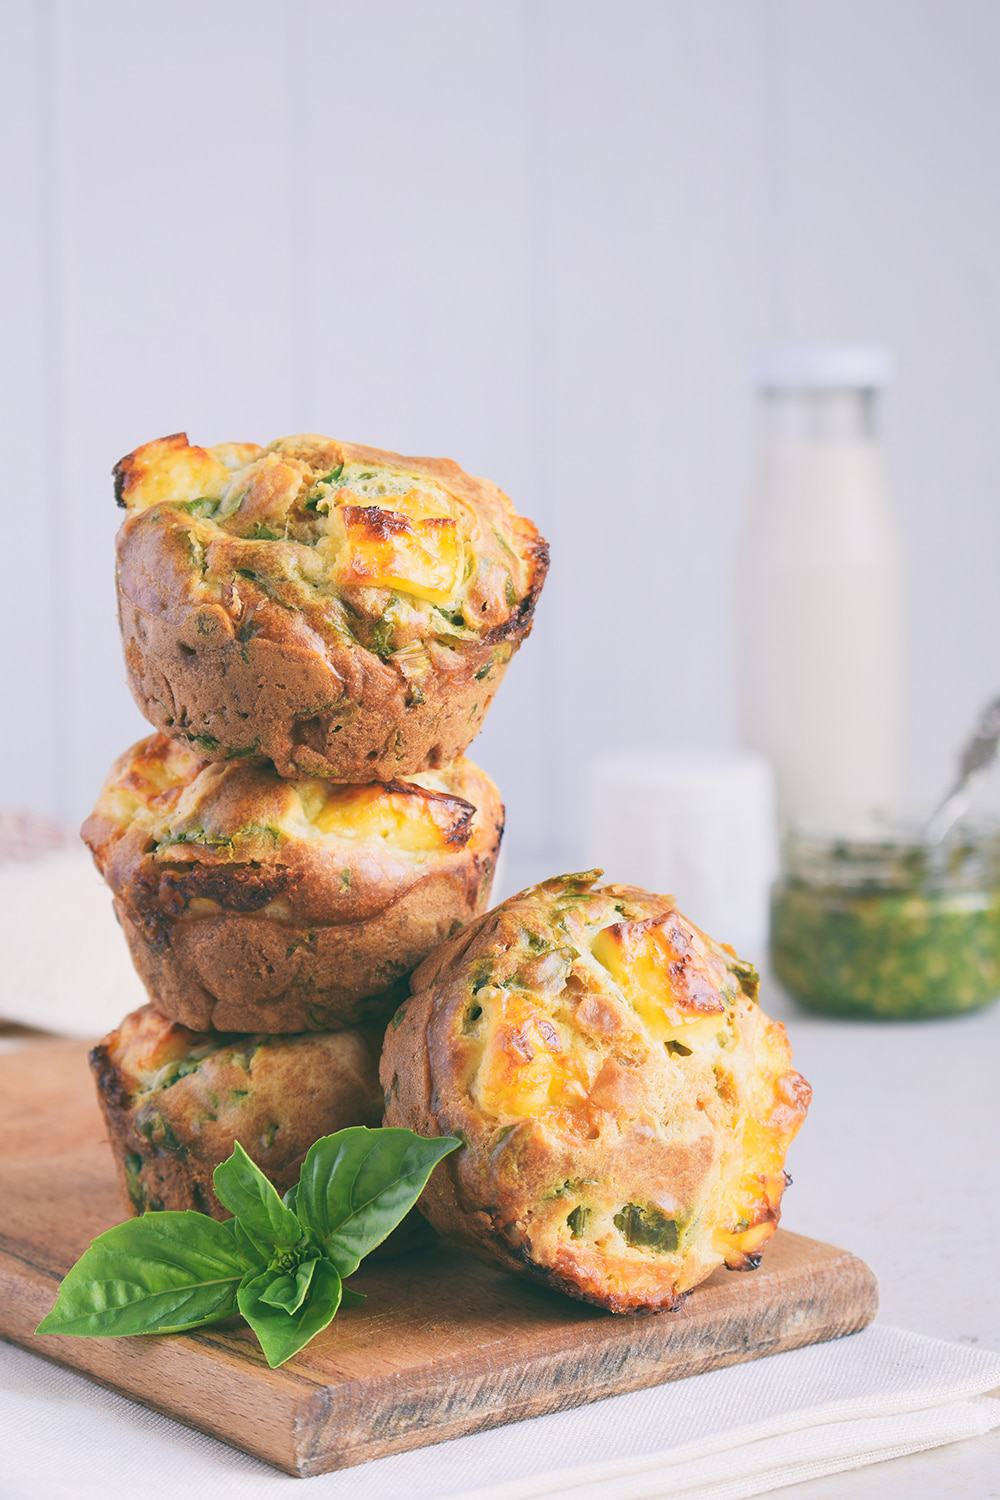 Piquant Cheese and Spinach Muffins | Cooking Clue